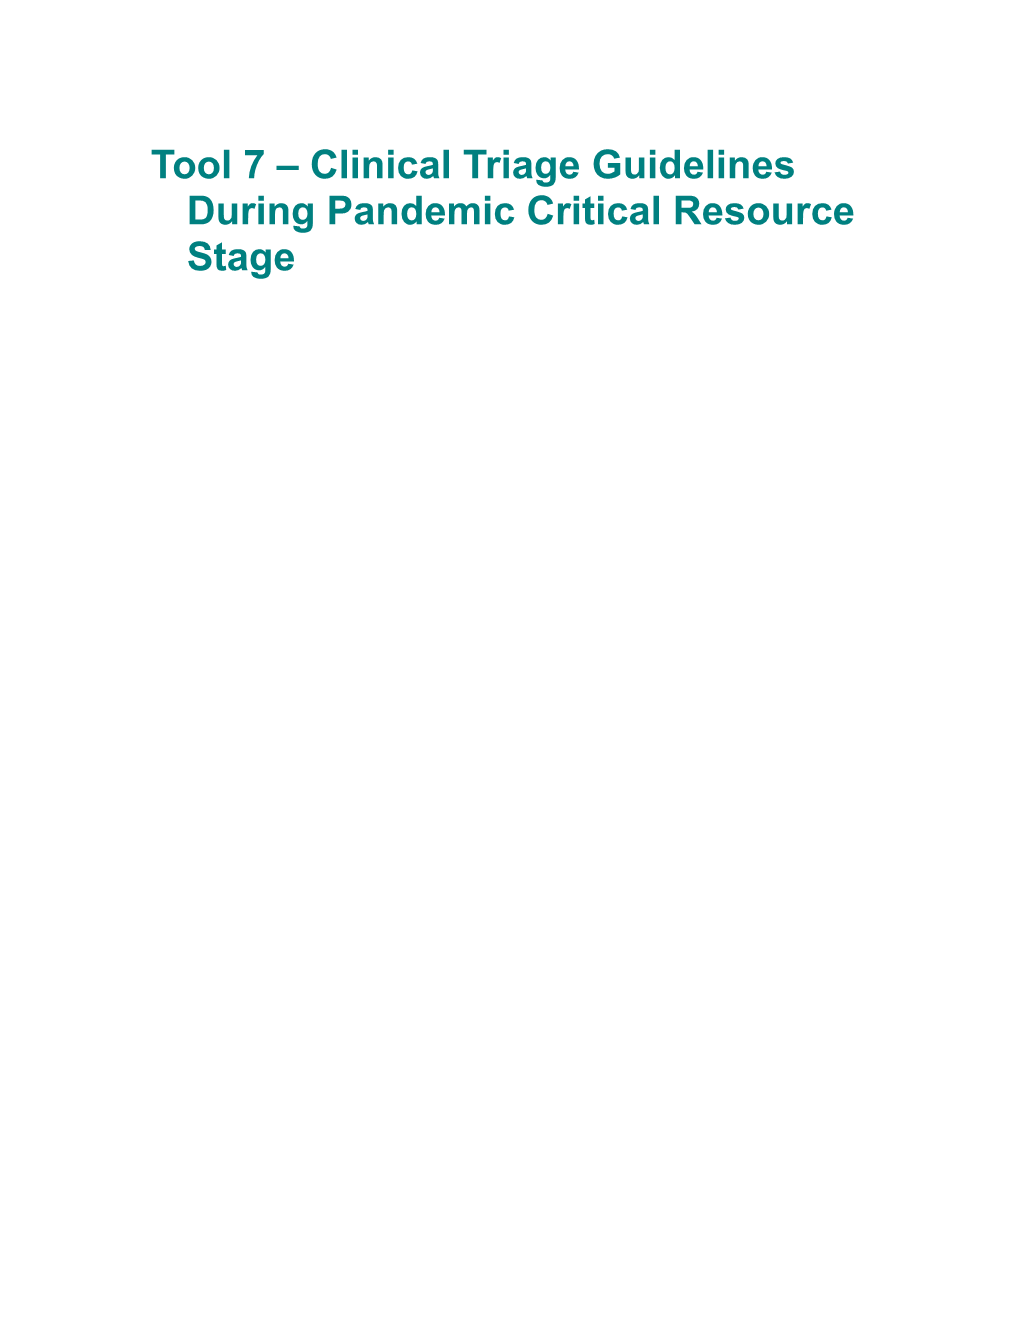 Tool 7 Clinical Triage Guidelines During Pandemic Critical Resource Stage